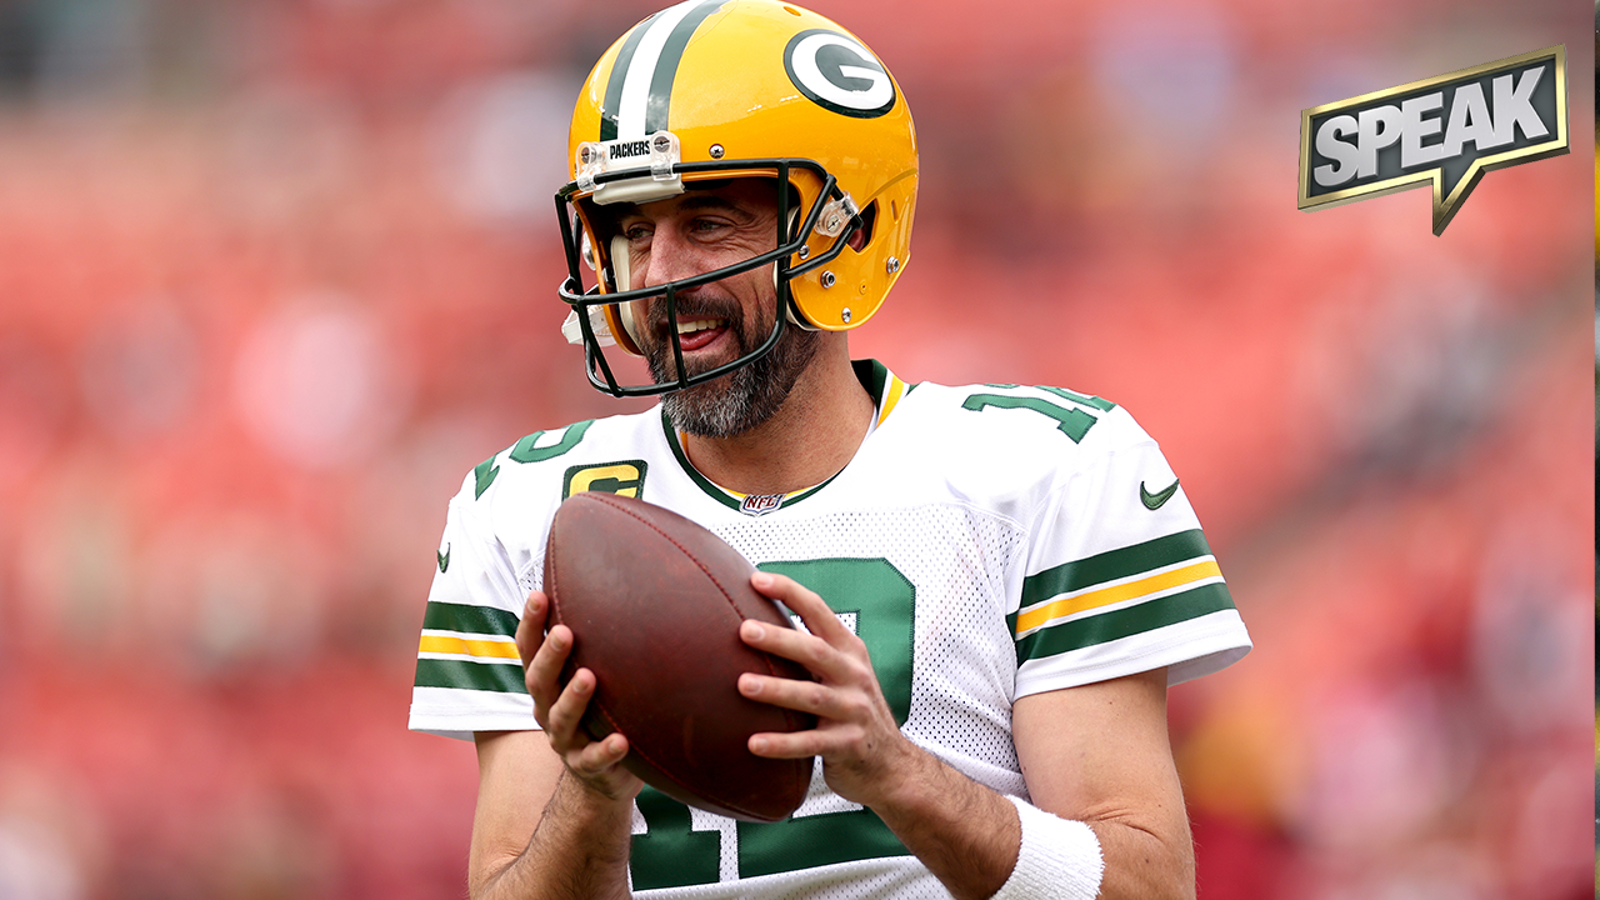 Would Aaron Rodgers make the New York Jets Super Bowl contenders?